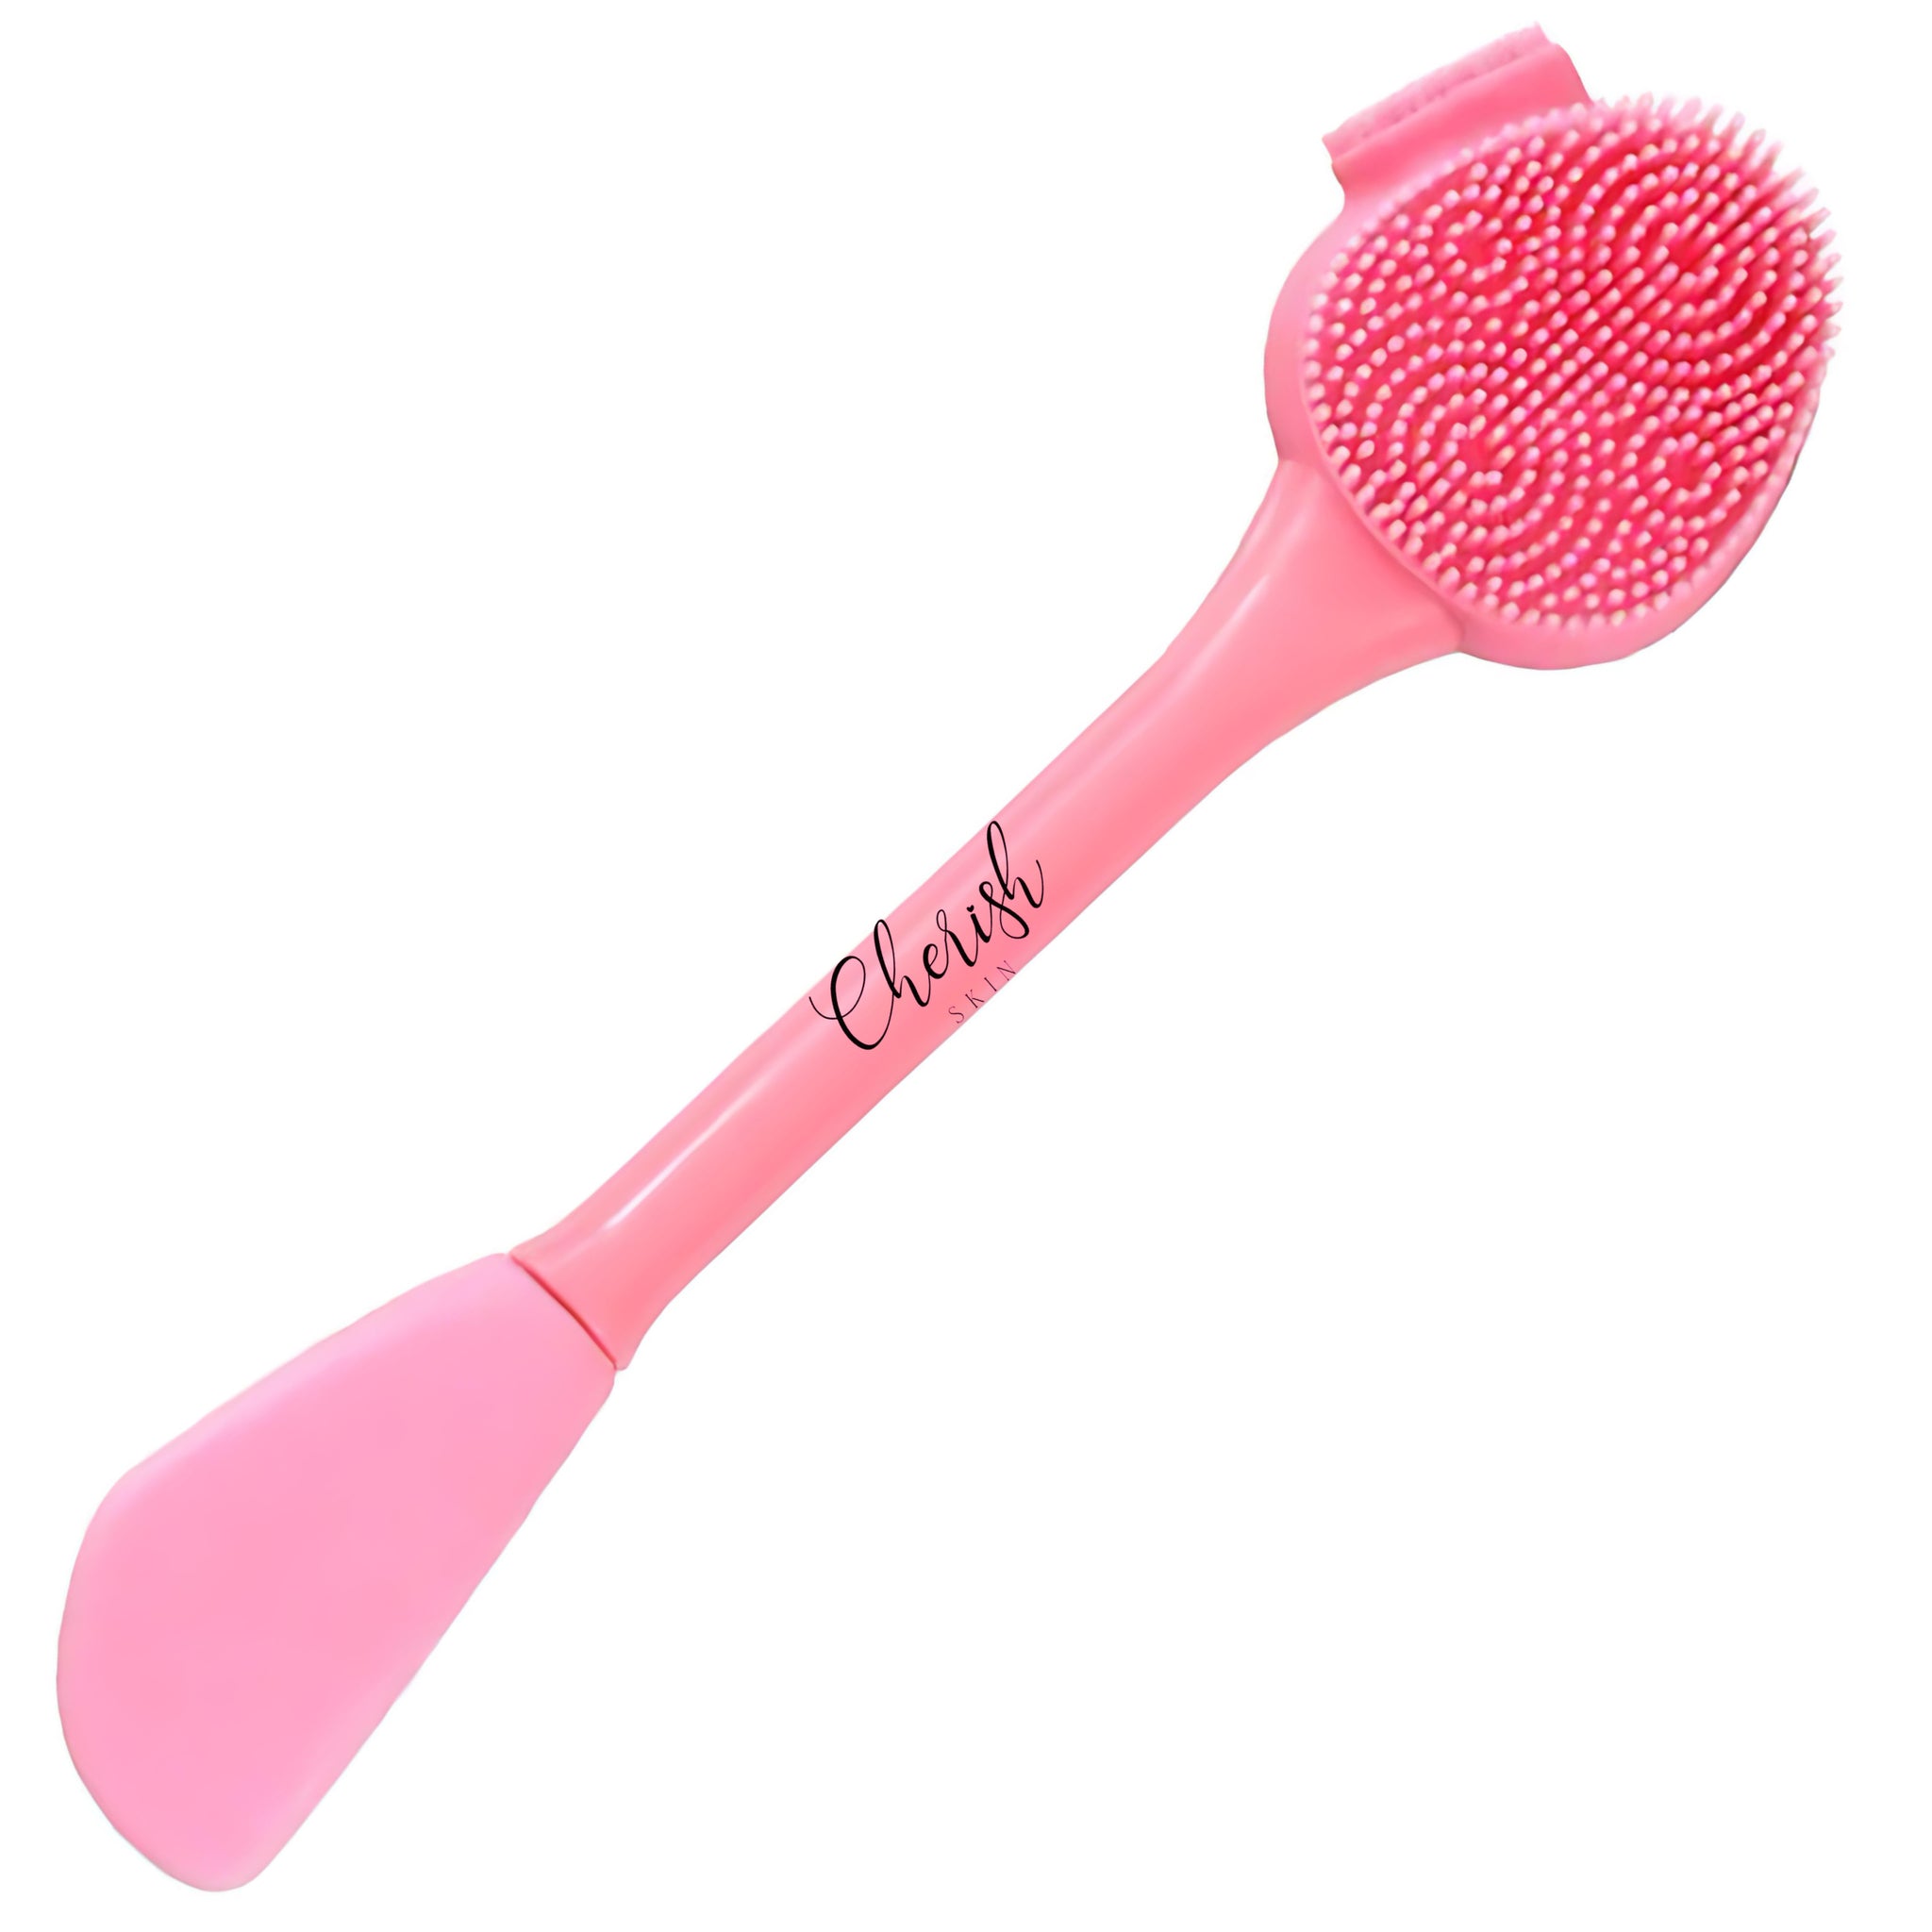 NEW! Double Sided Facial Cleansing Brush